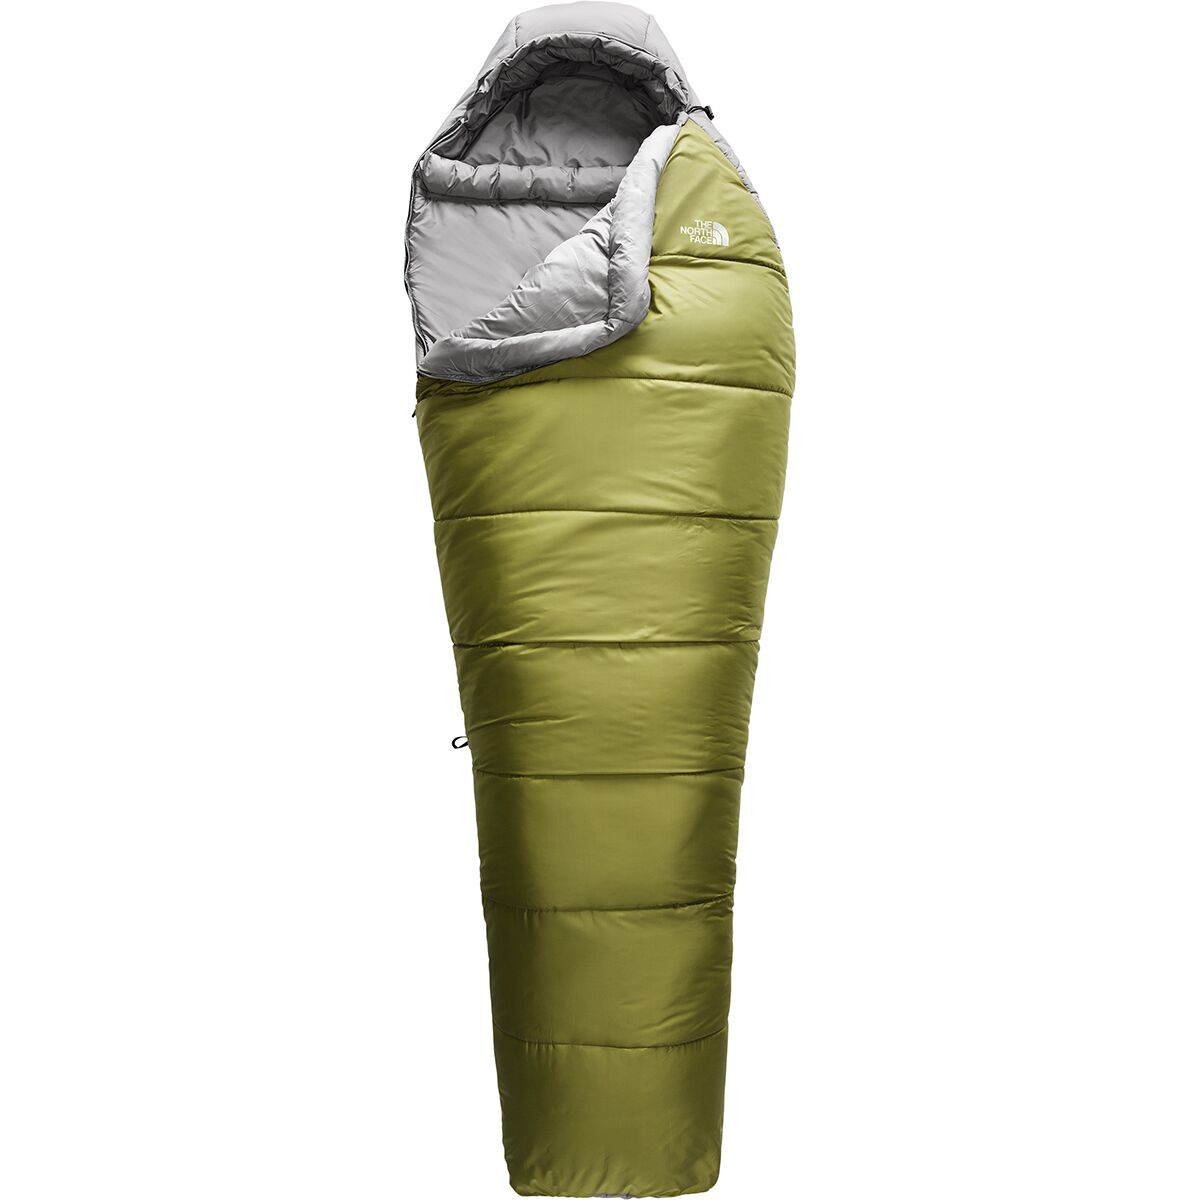 The North Face Wasatch Sleeping Bag: 0F Synthetic